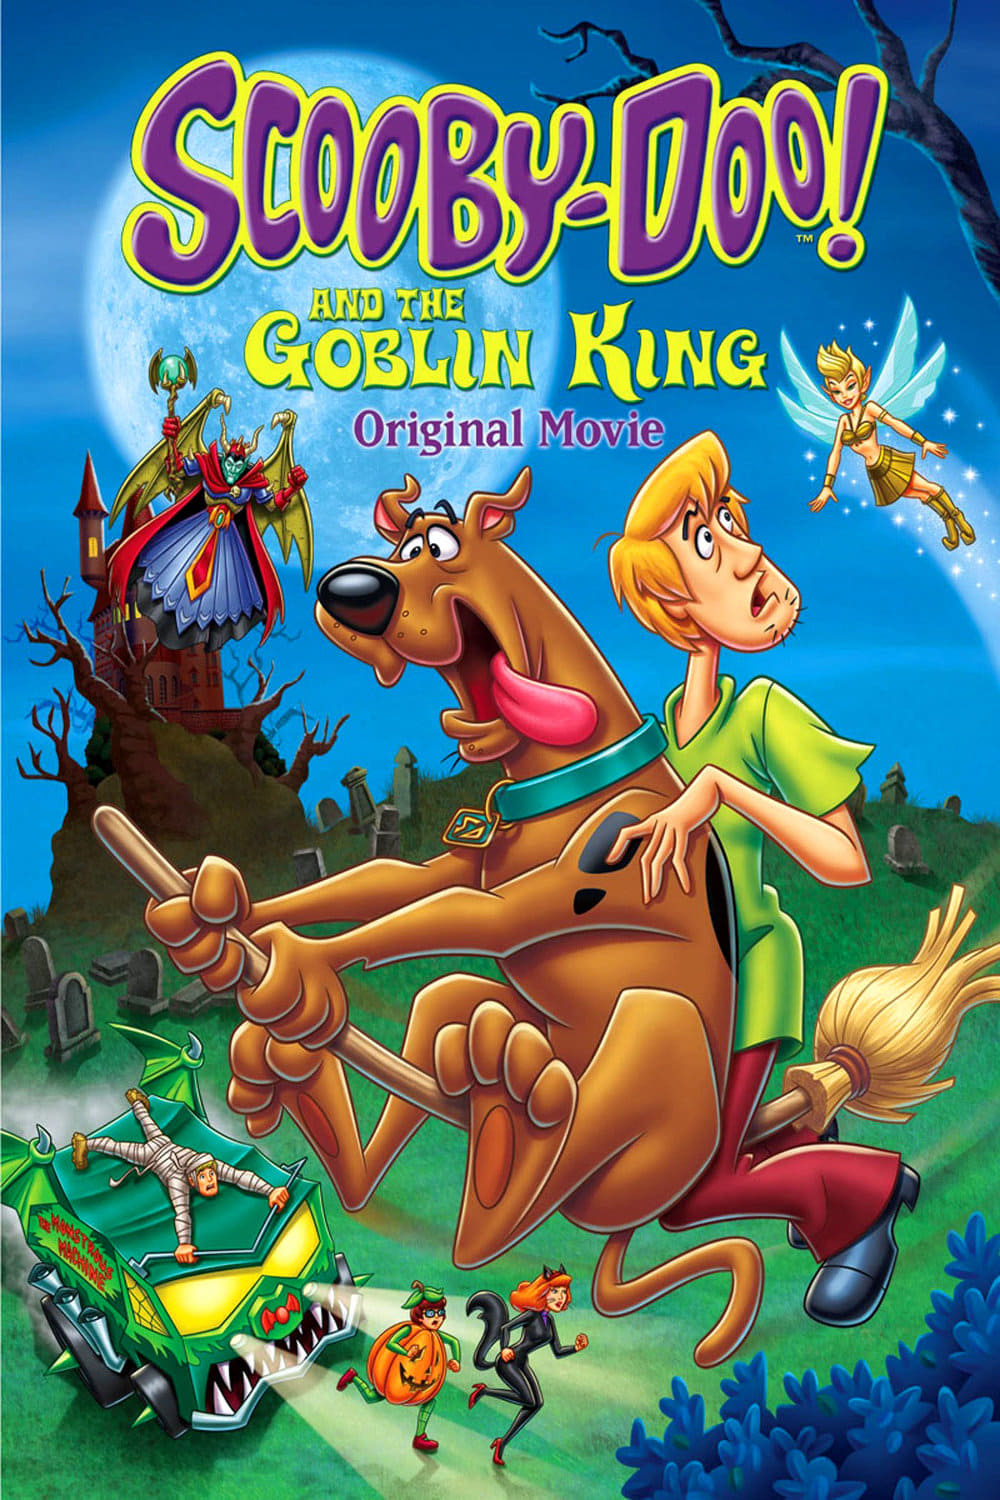 Scooby-Doo! and the Goblin King (2008)